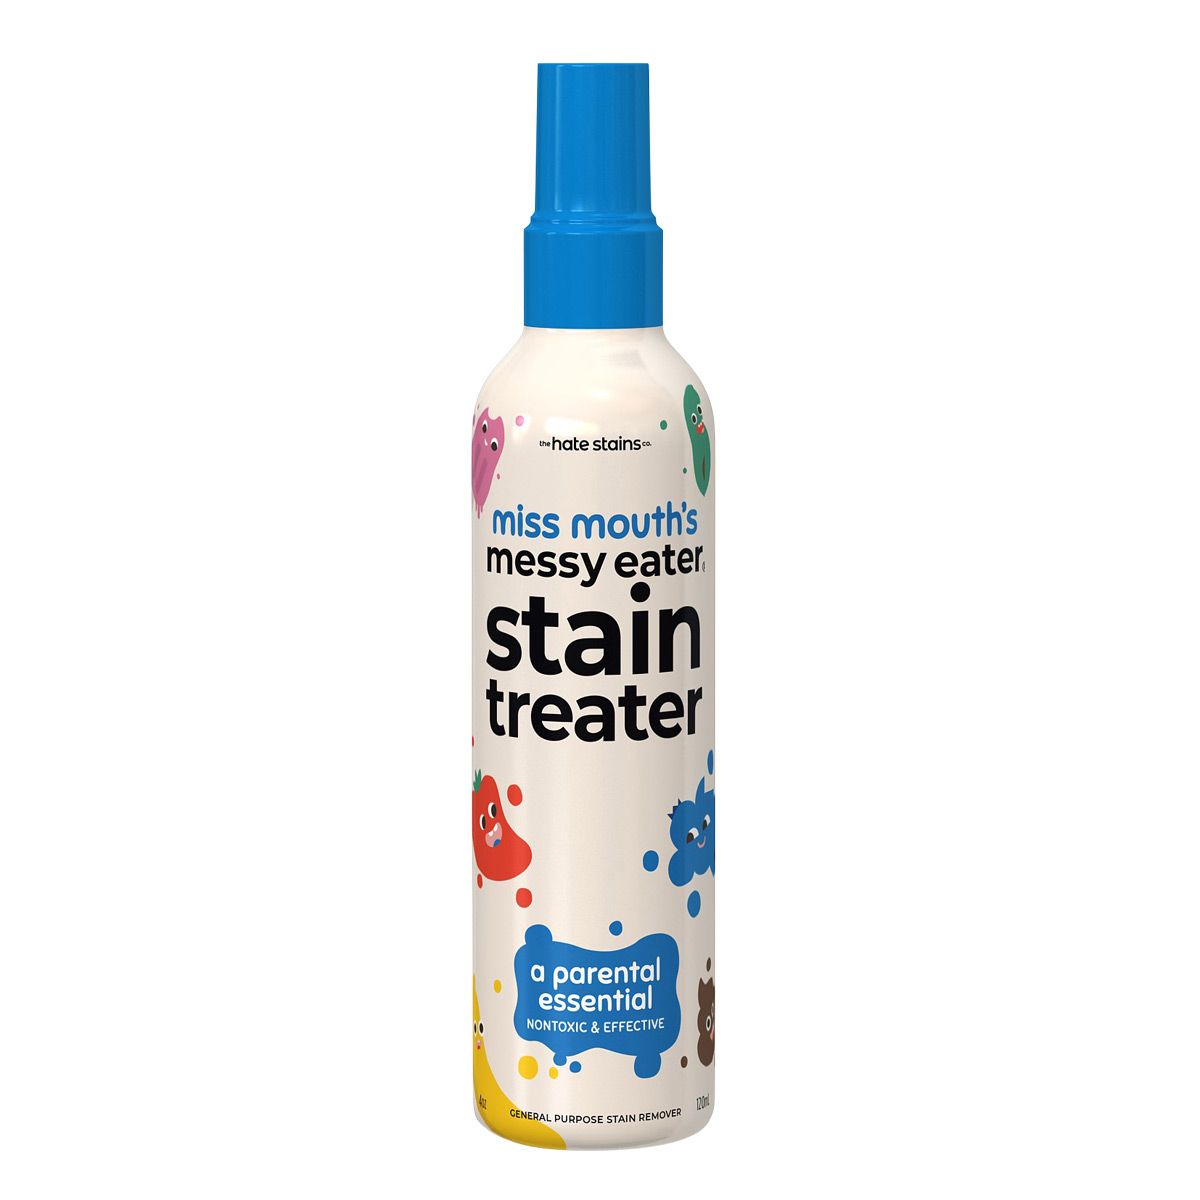 The Hate Stains Co Messy Eater 4oz Stain Treater | The Container Store